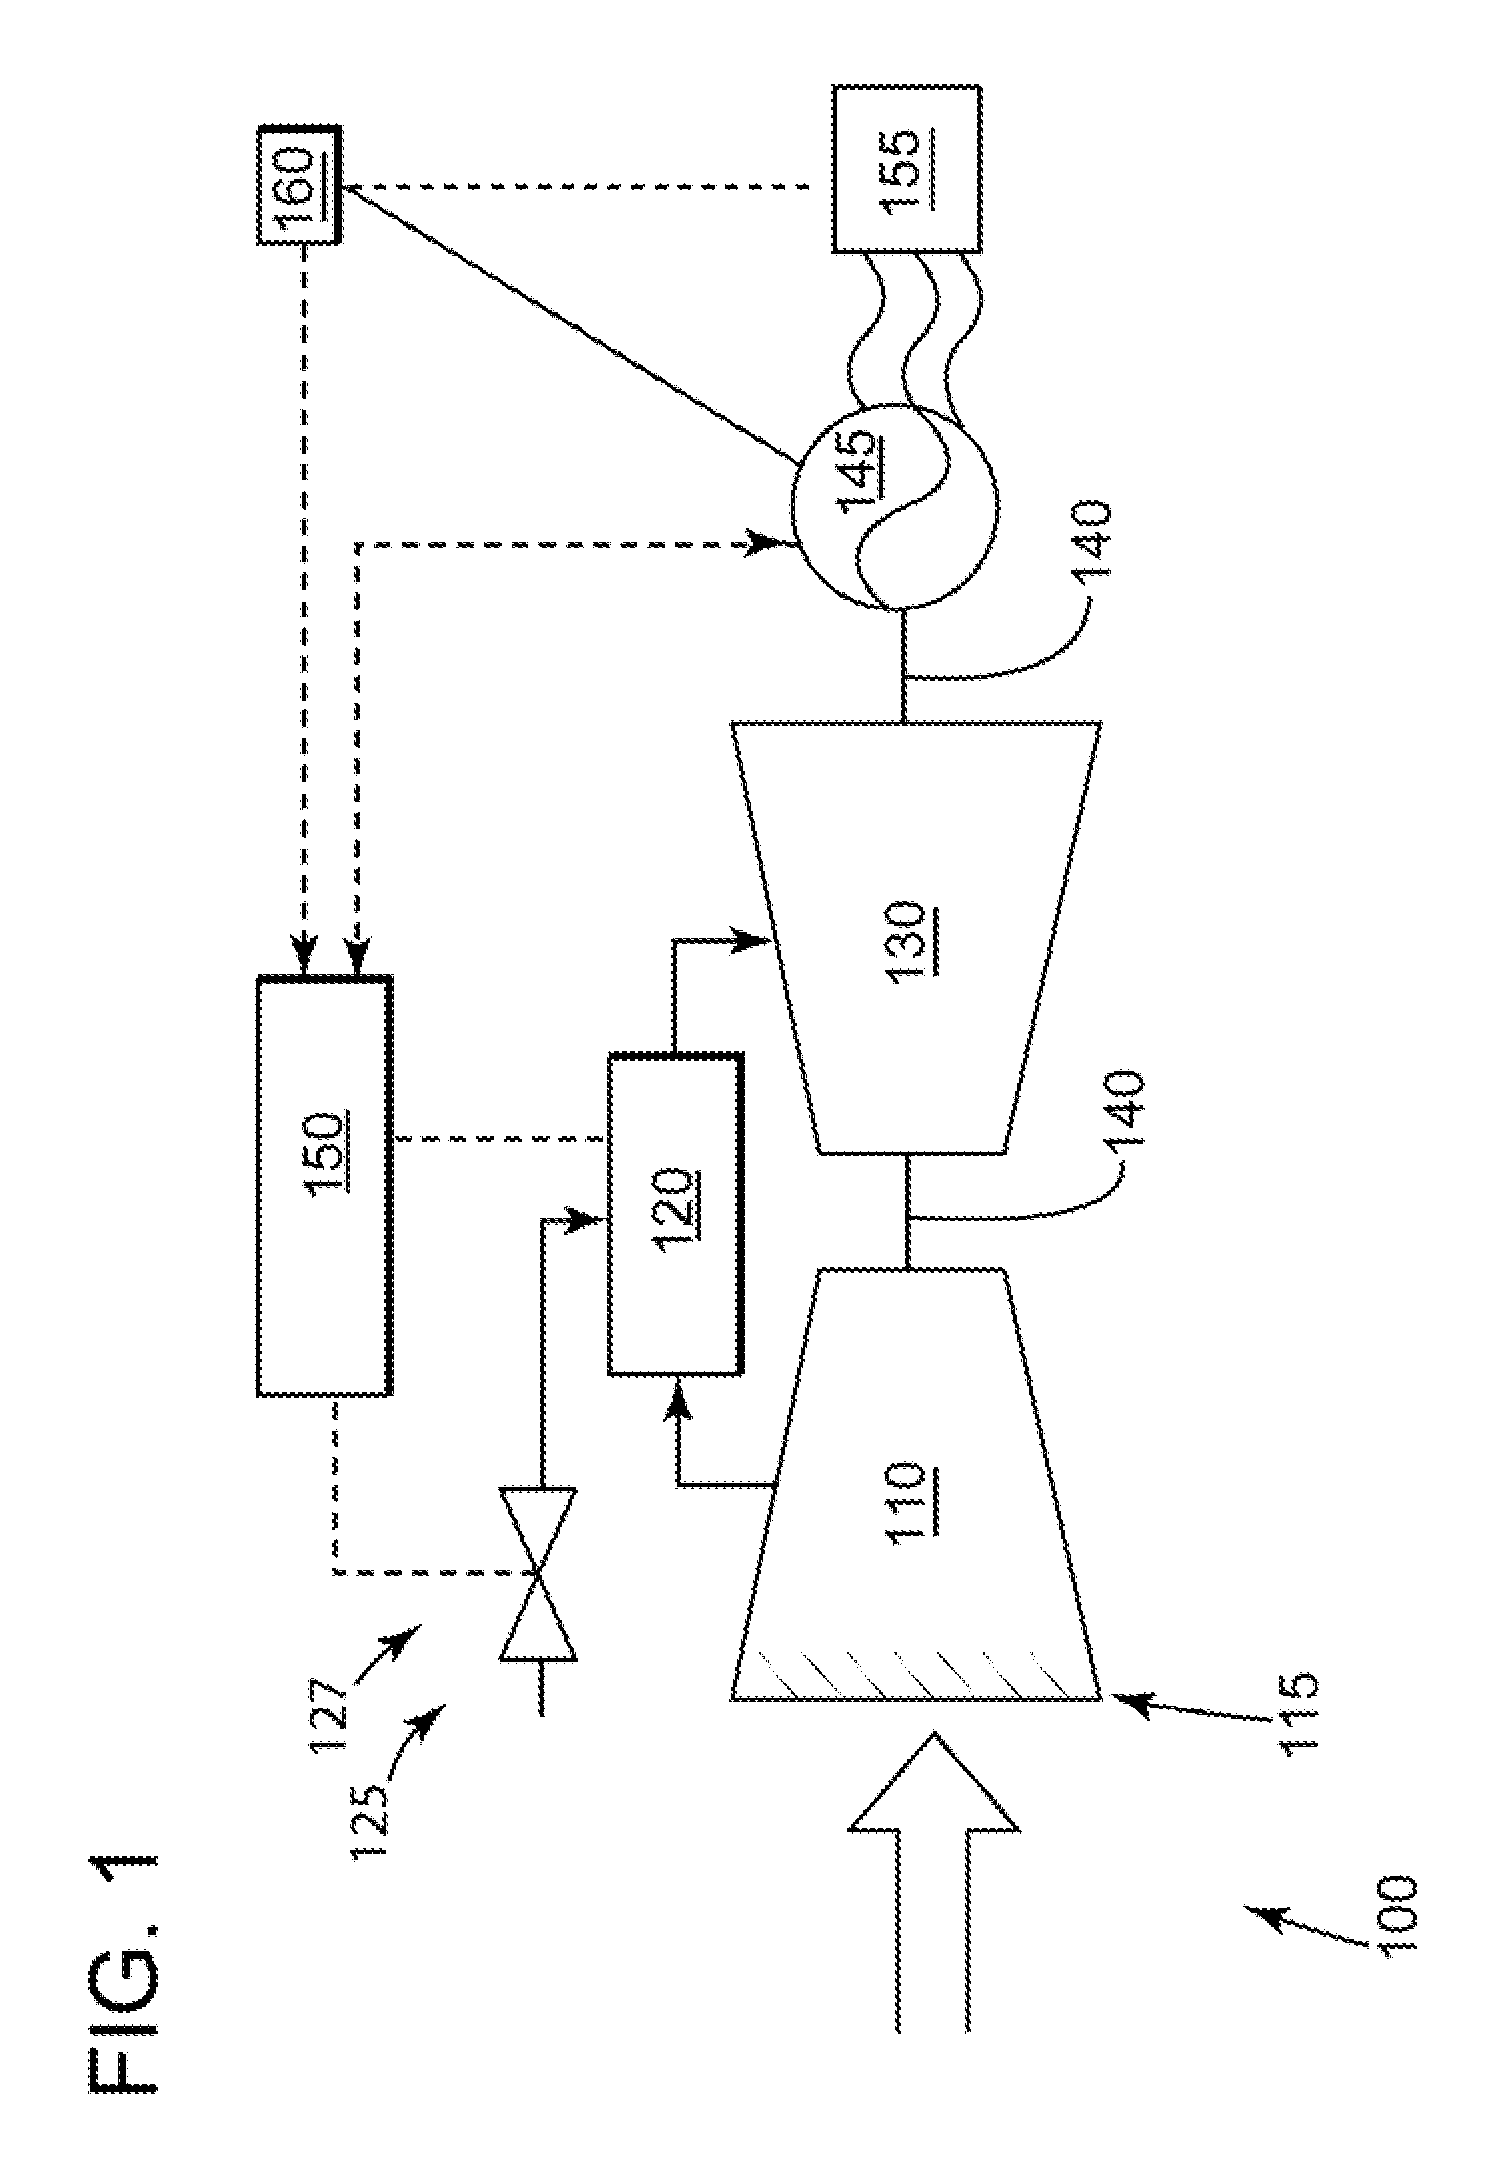 Method of synchronizing a turbomachine generator to an electric grid